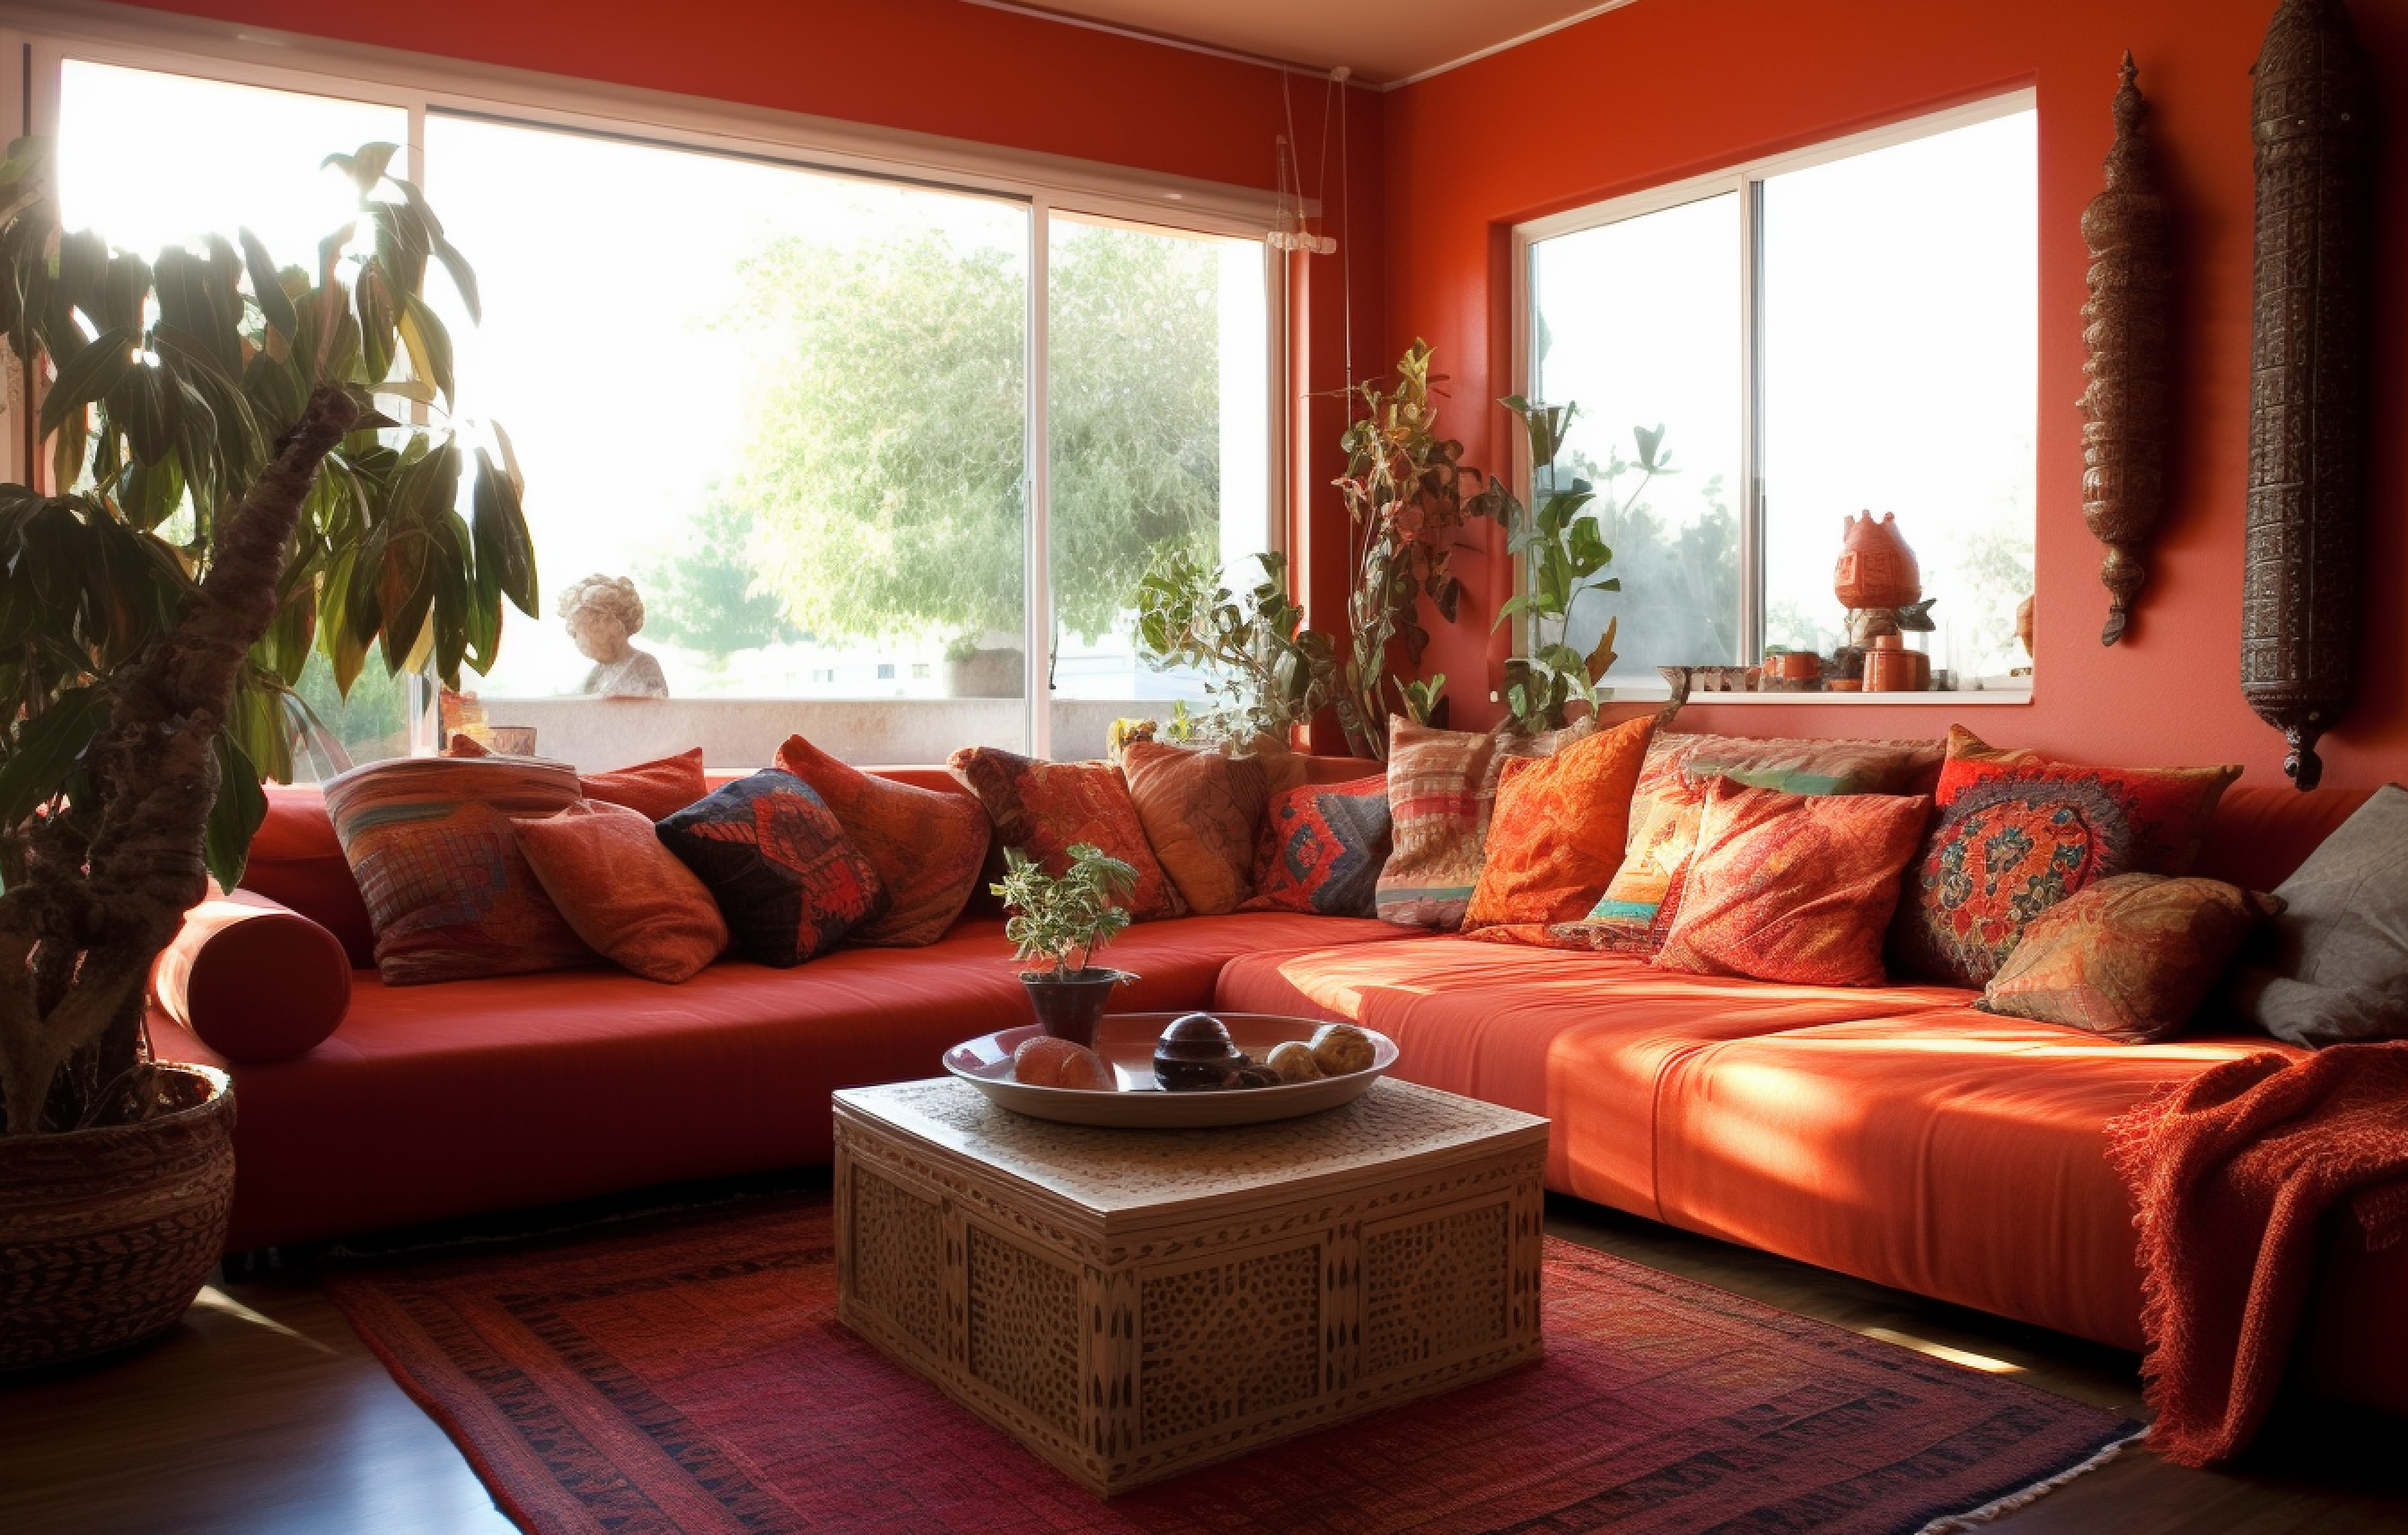 4. Red and Orange Color Scheme - Bohemian Lounge